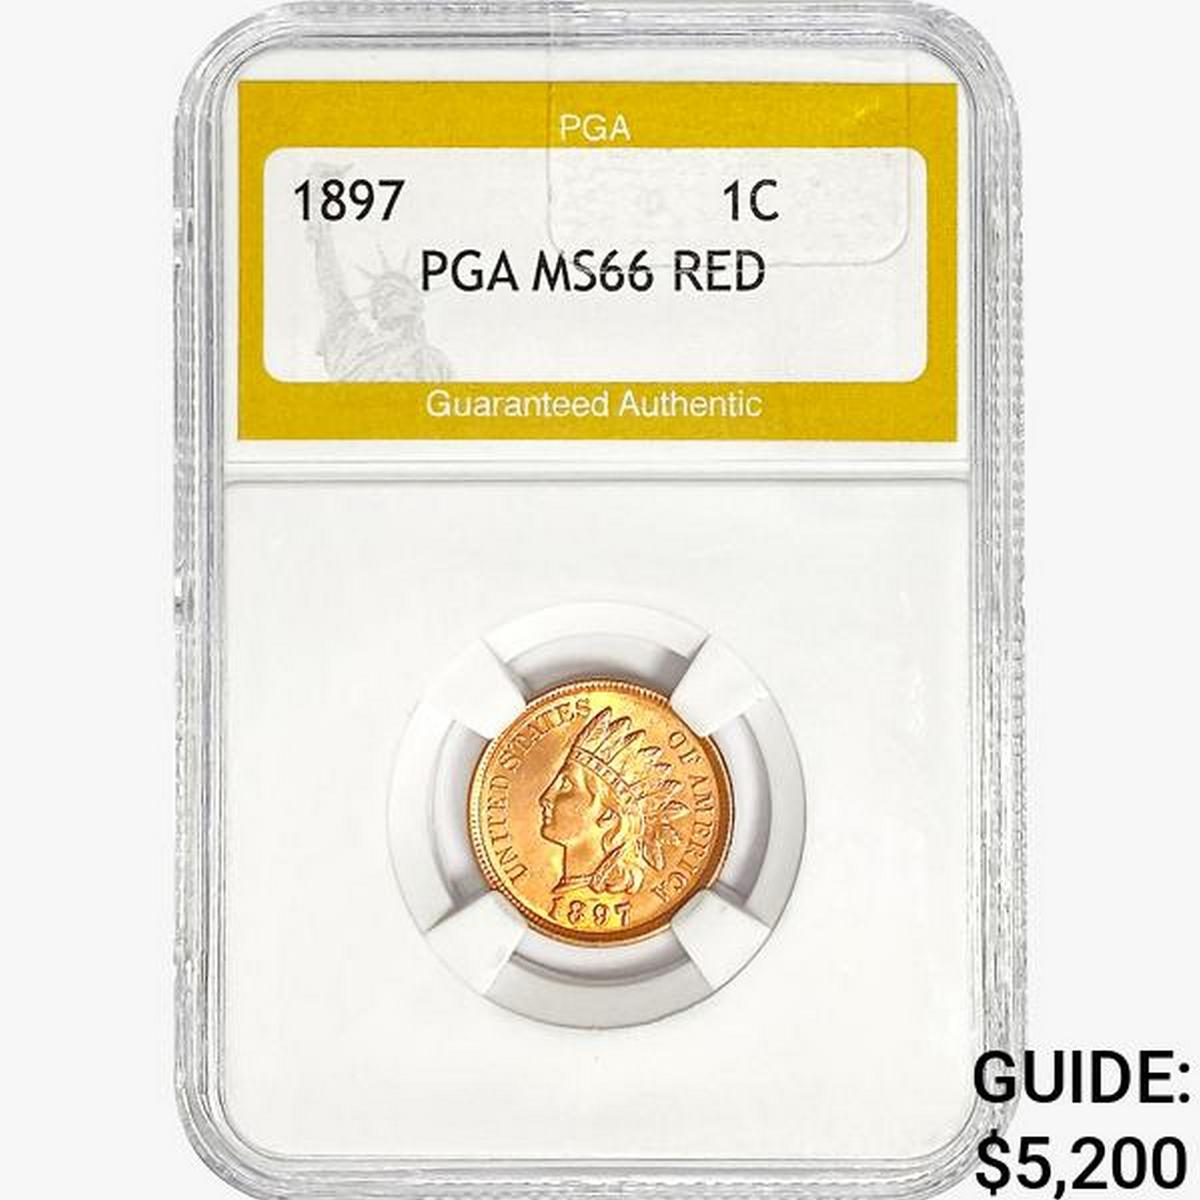 1897 Indian Head Cent PGA MS66 RED